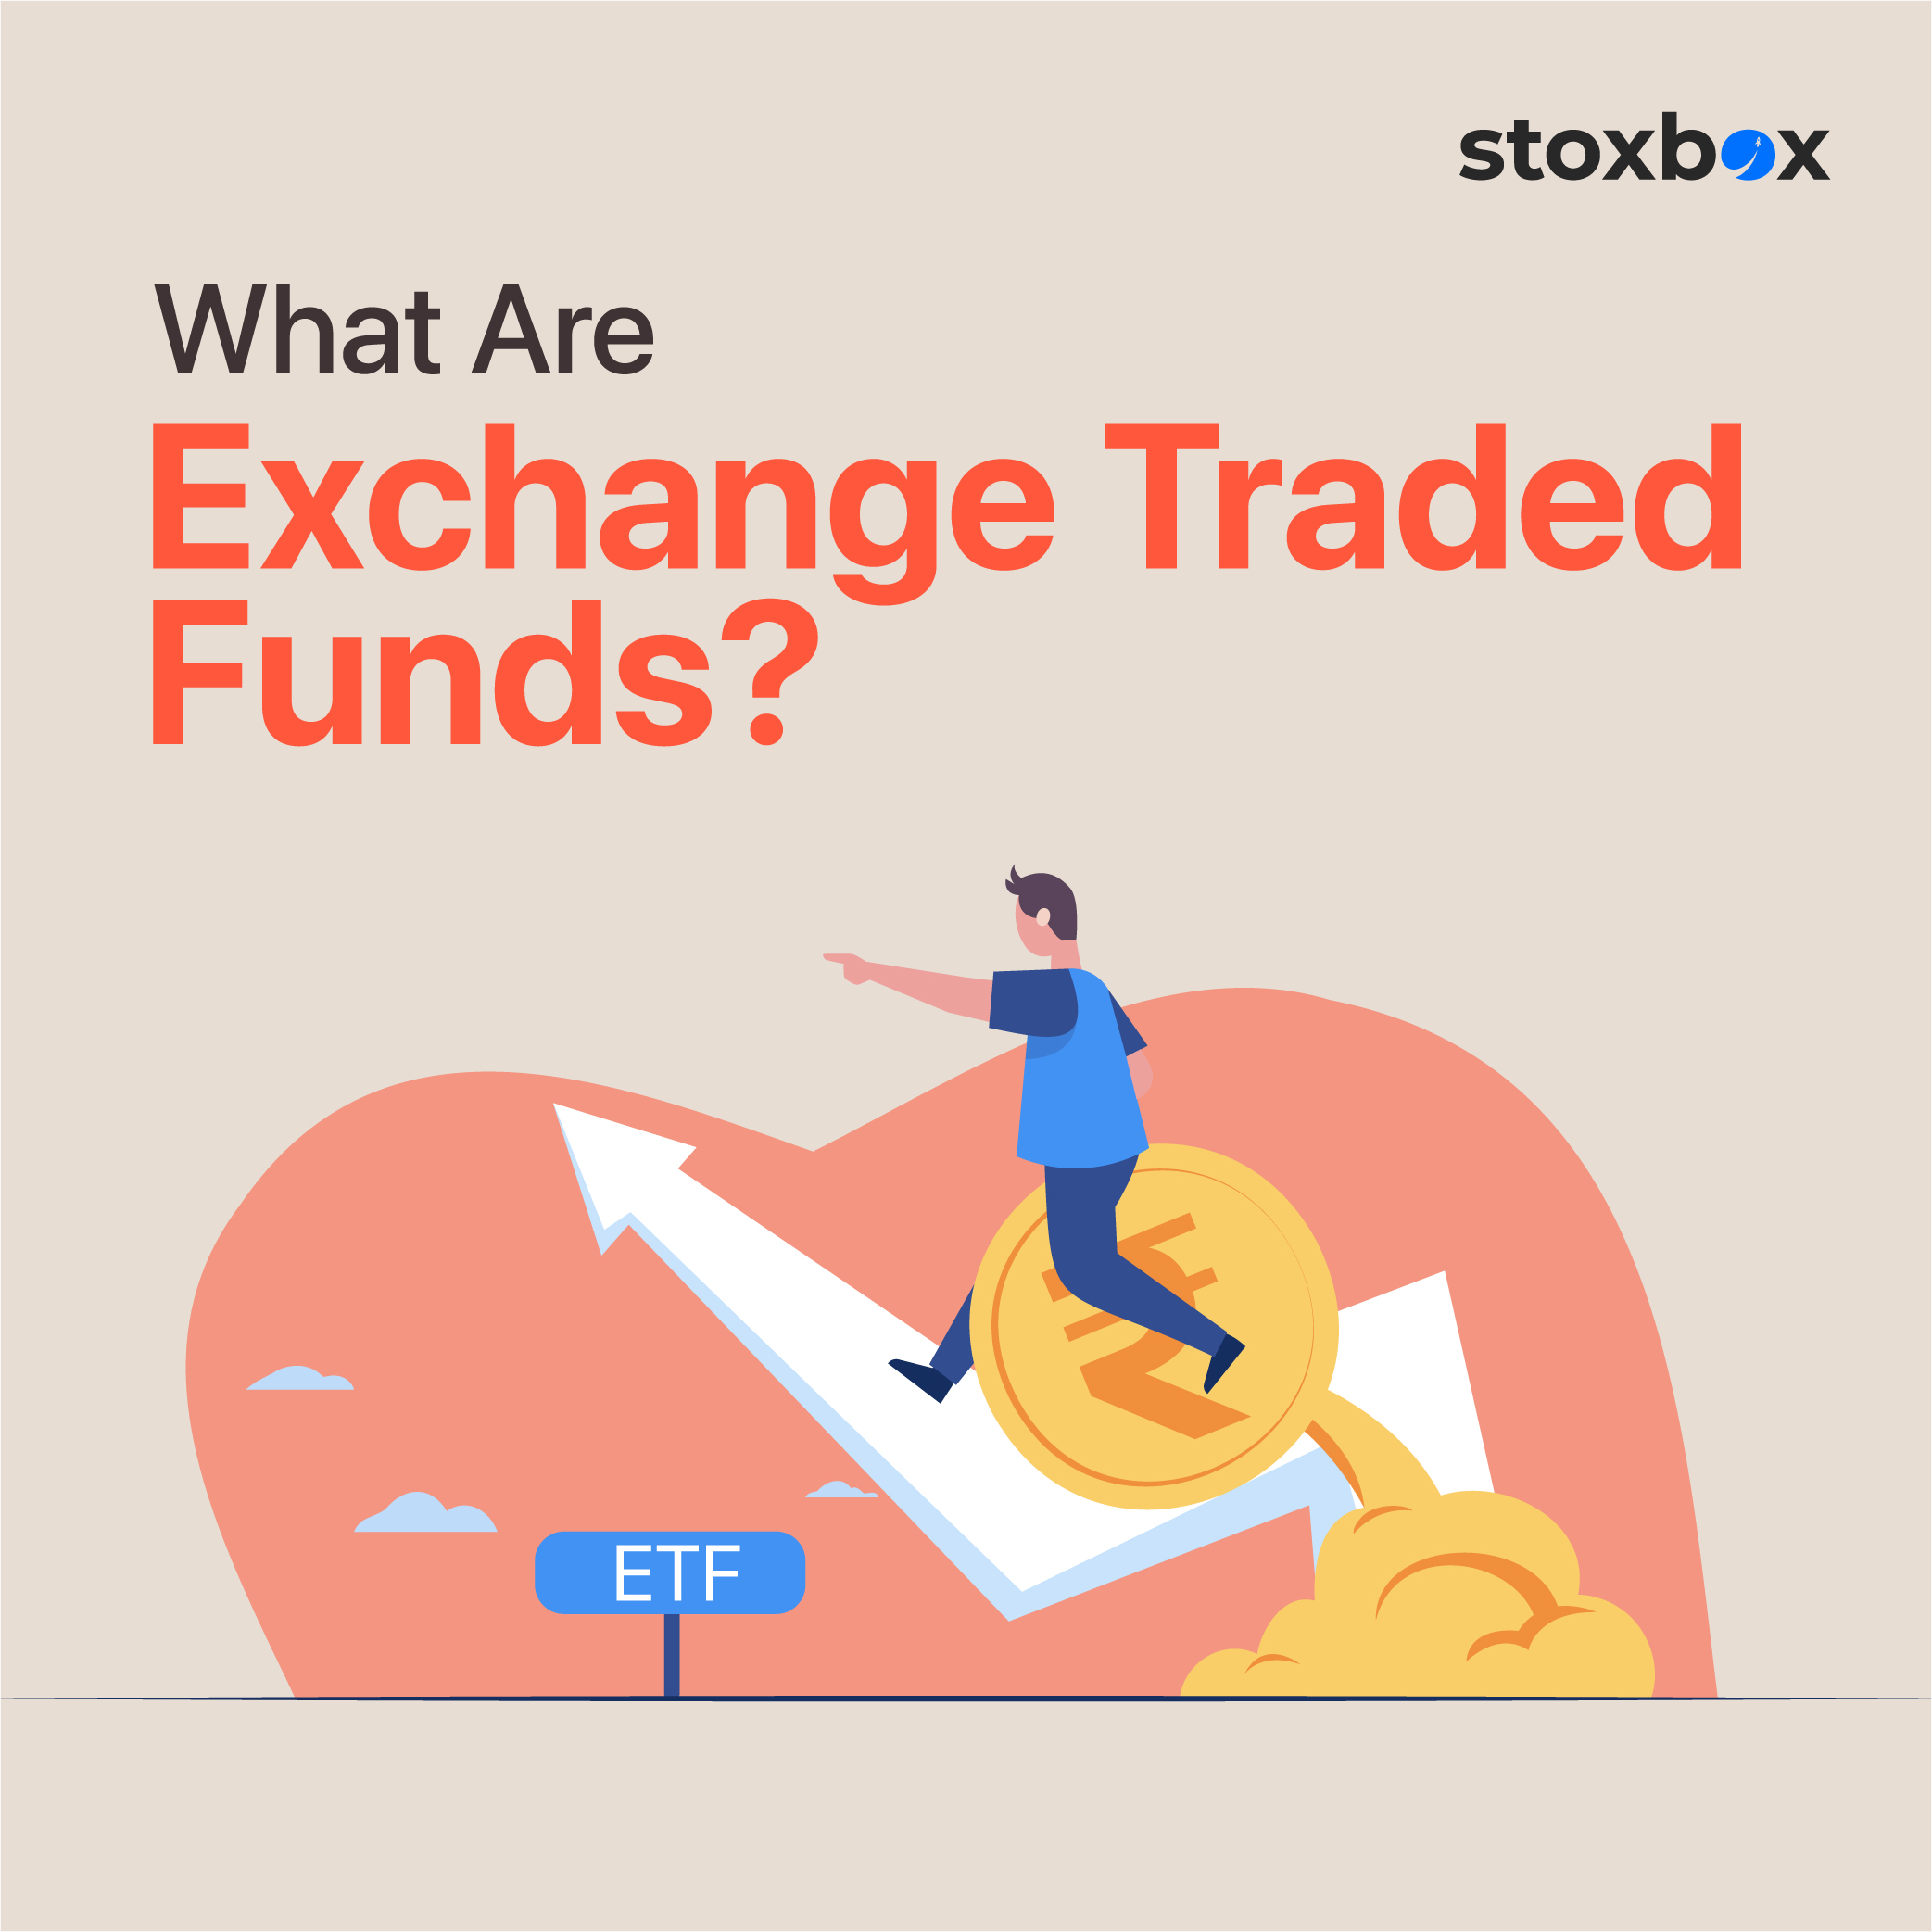 Difference Between Index Funds and ETF